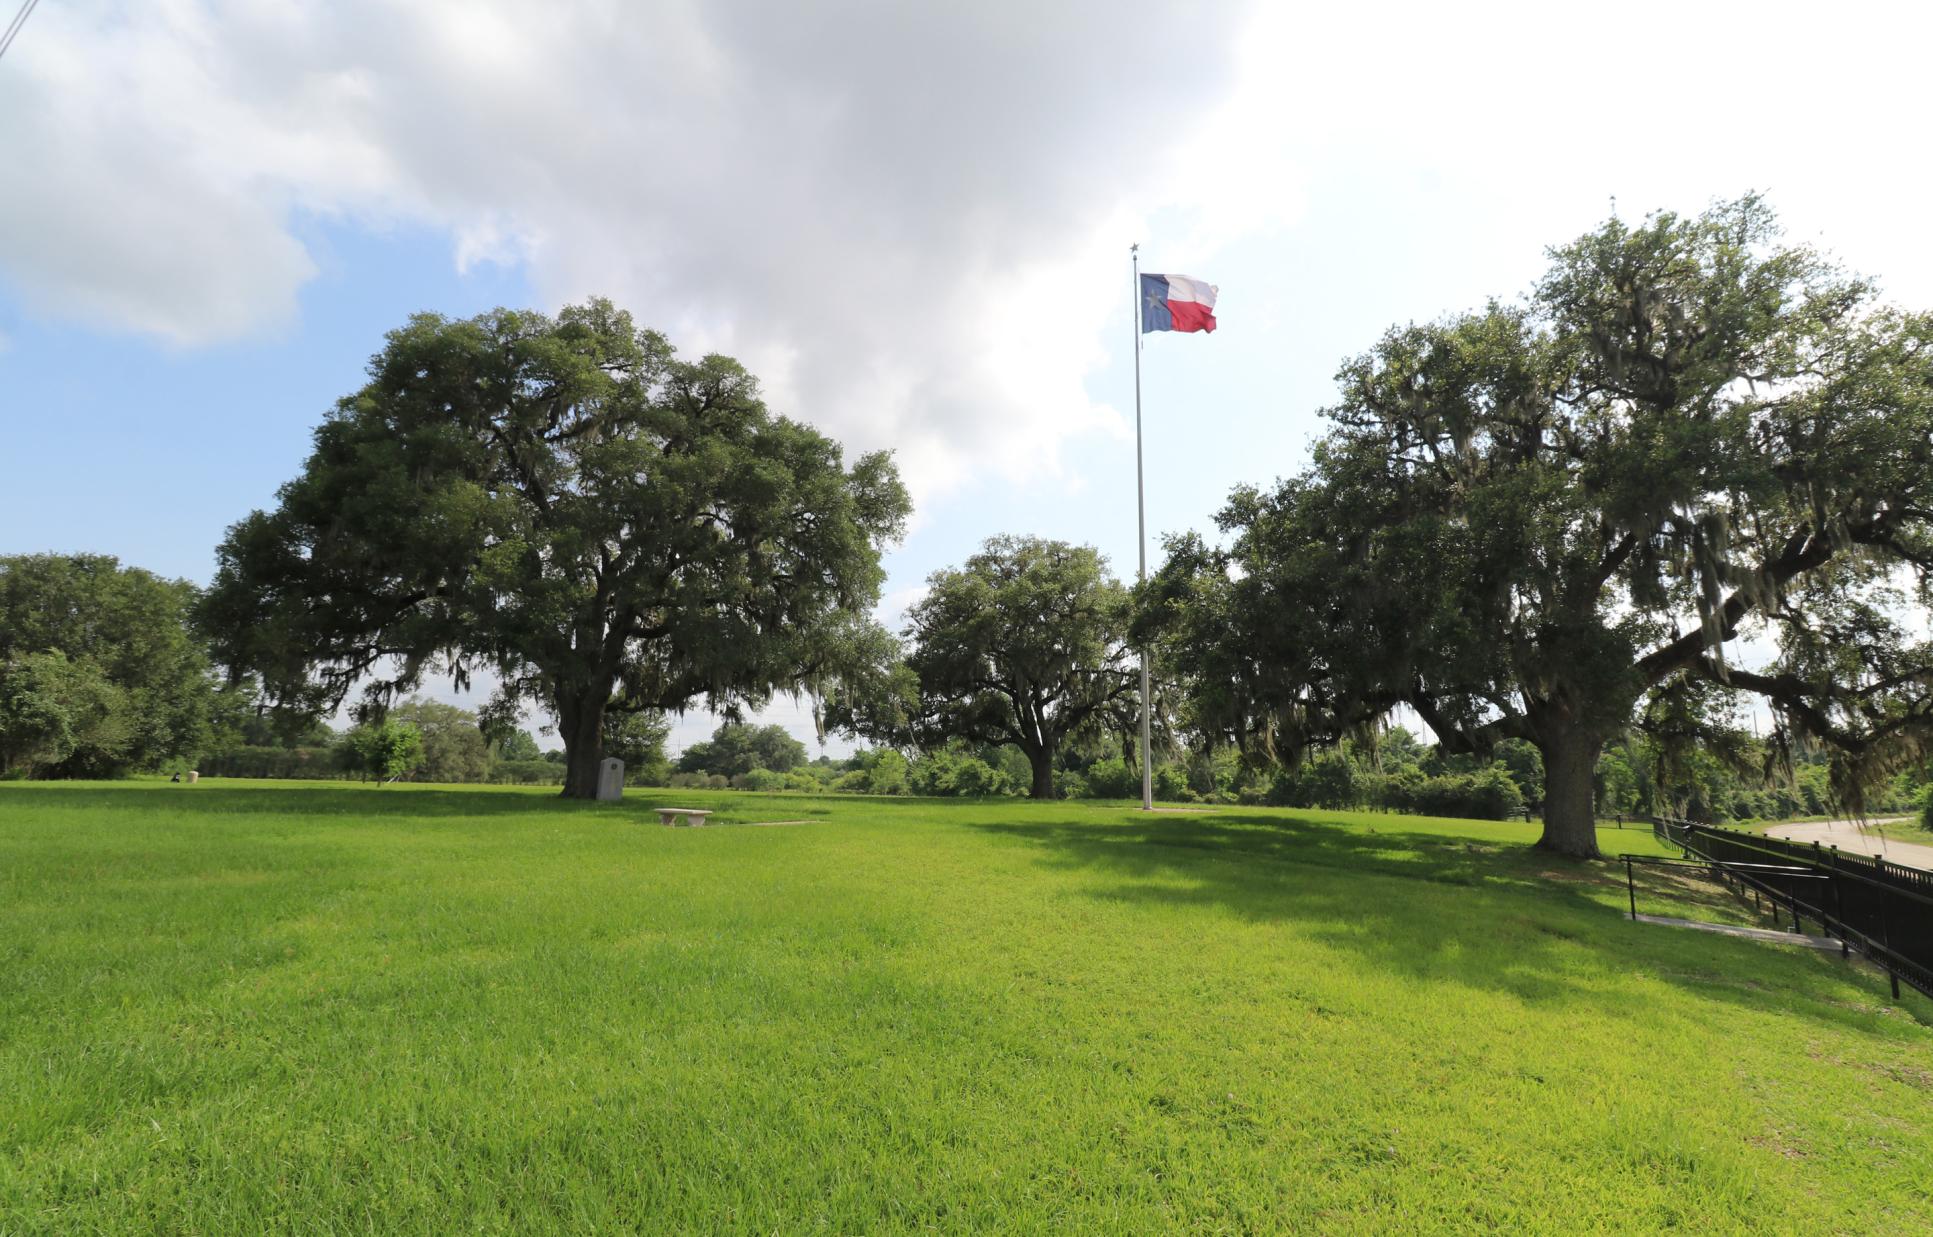 Field with American flag in the background at Centennial marker at Stephen F. Austin Memorial